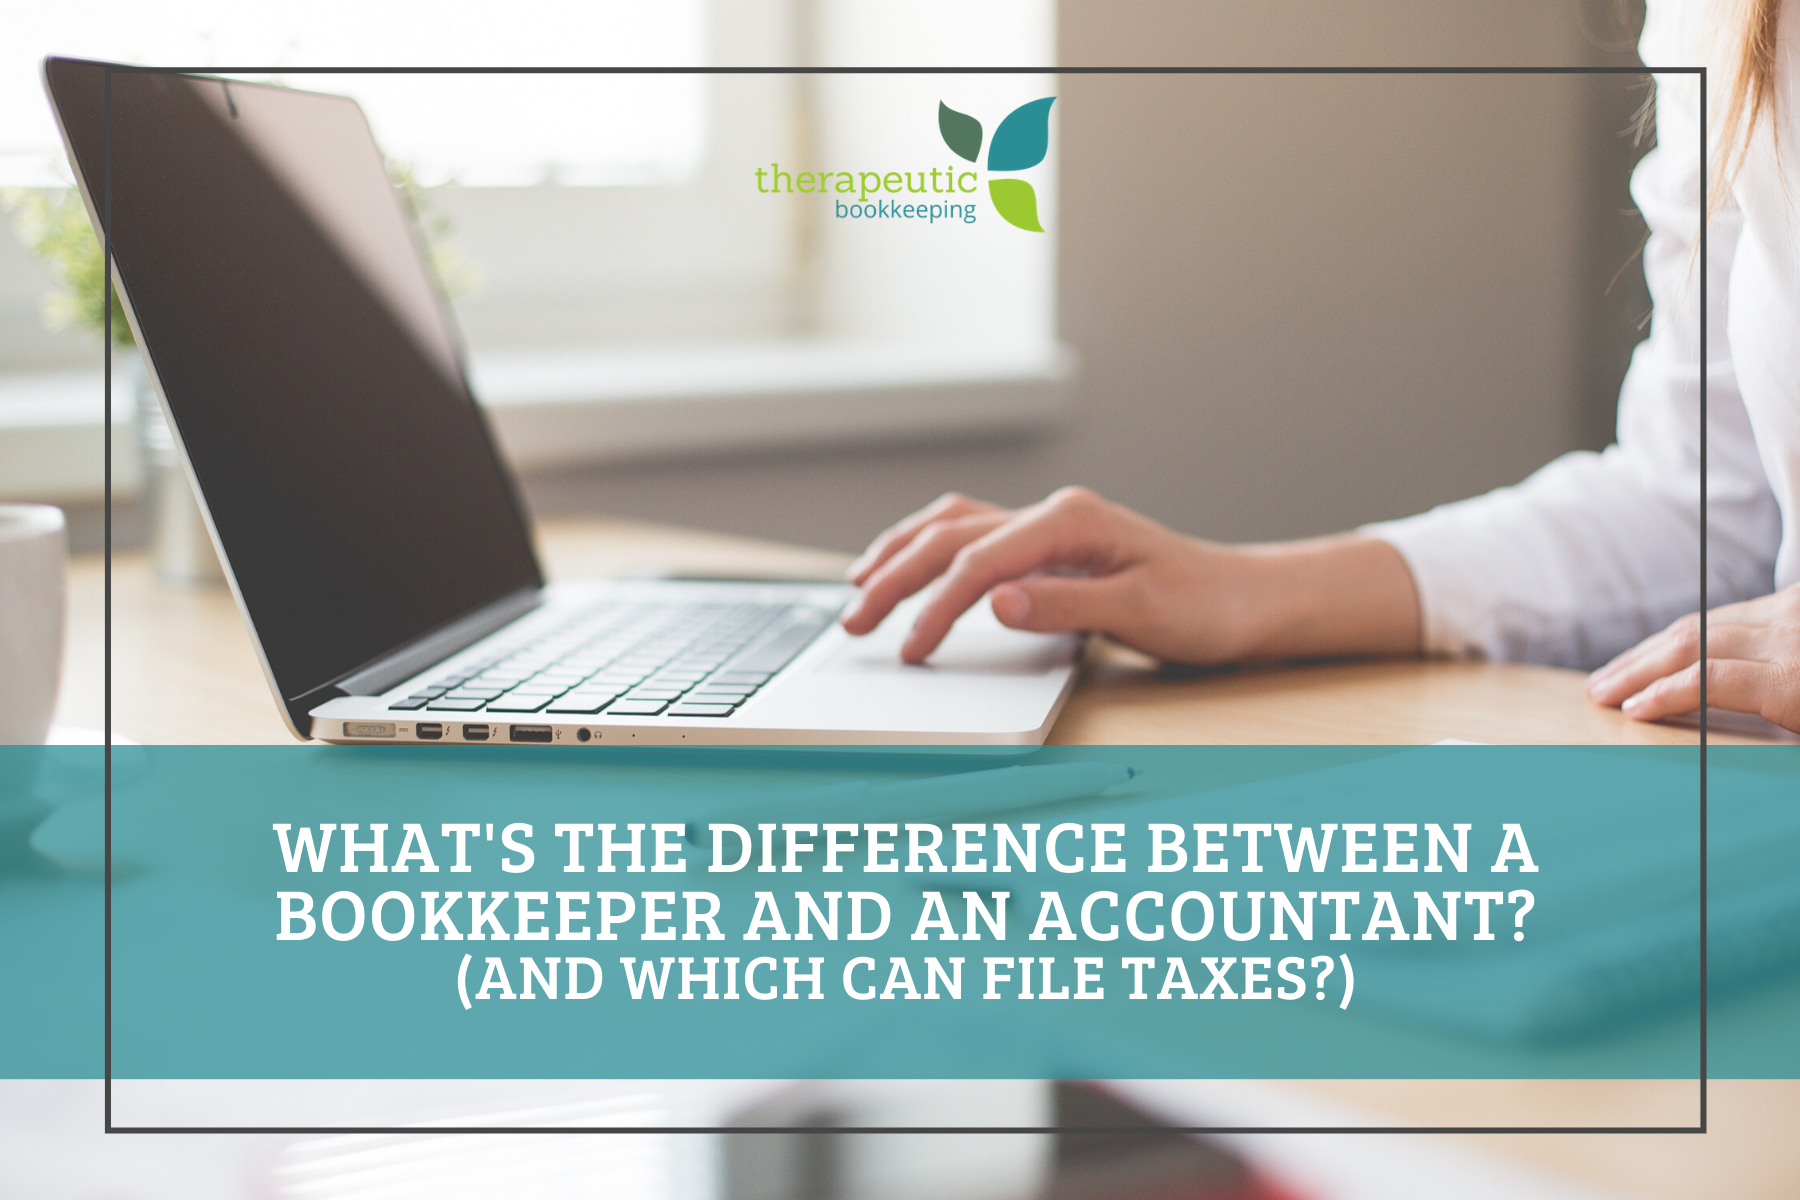 bookkeepers and accountants